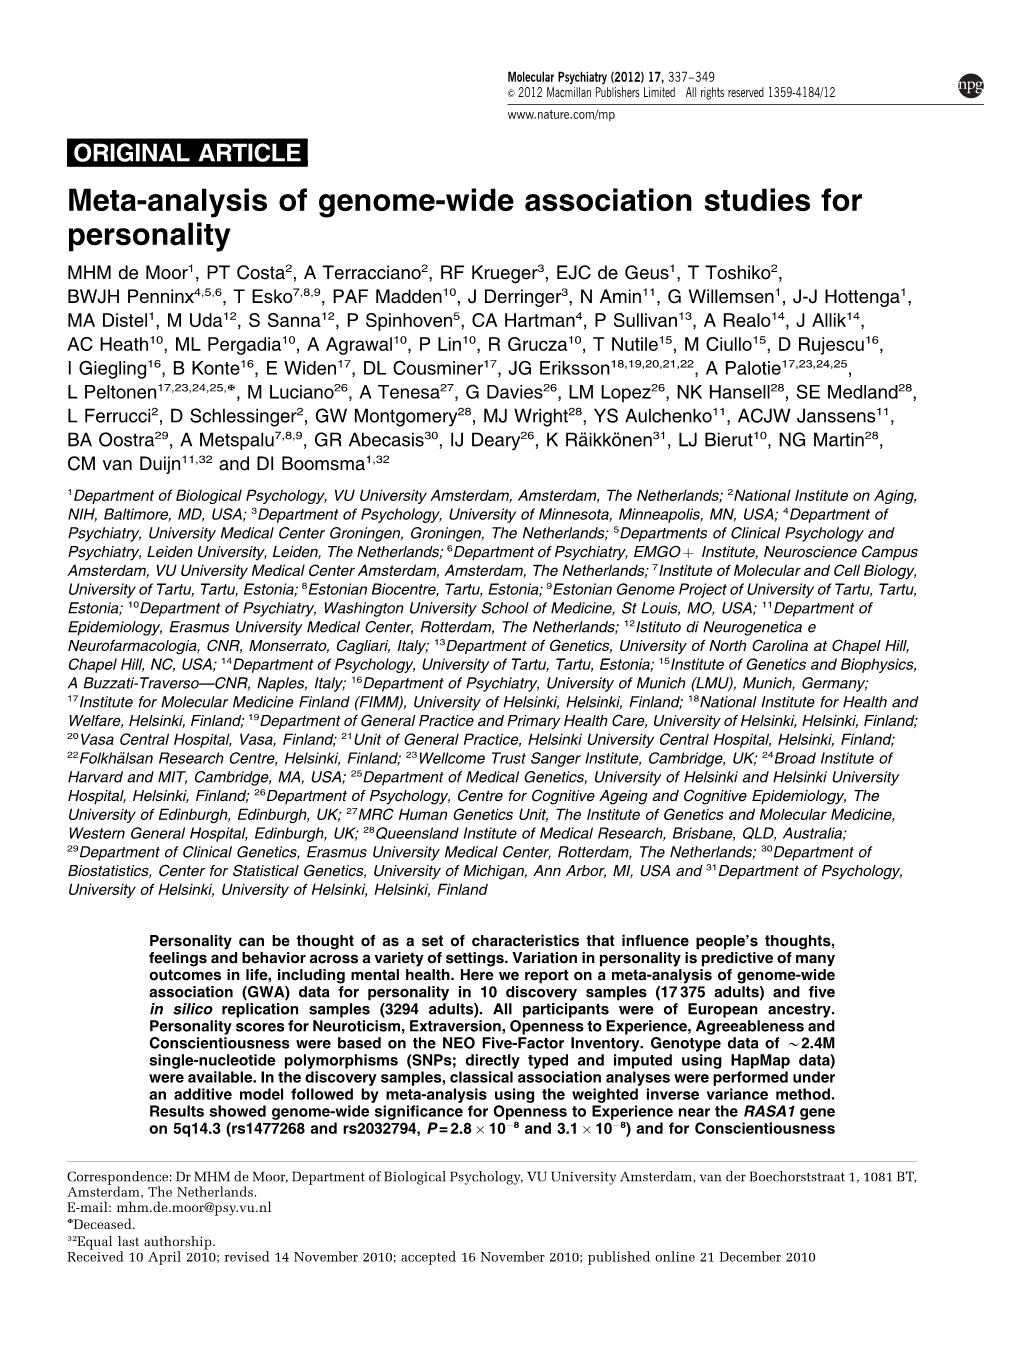 Meta-Analysis of Genome-Wide Association Studies for Personality